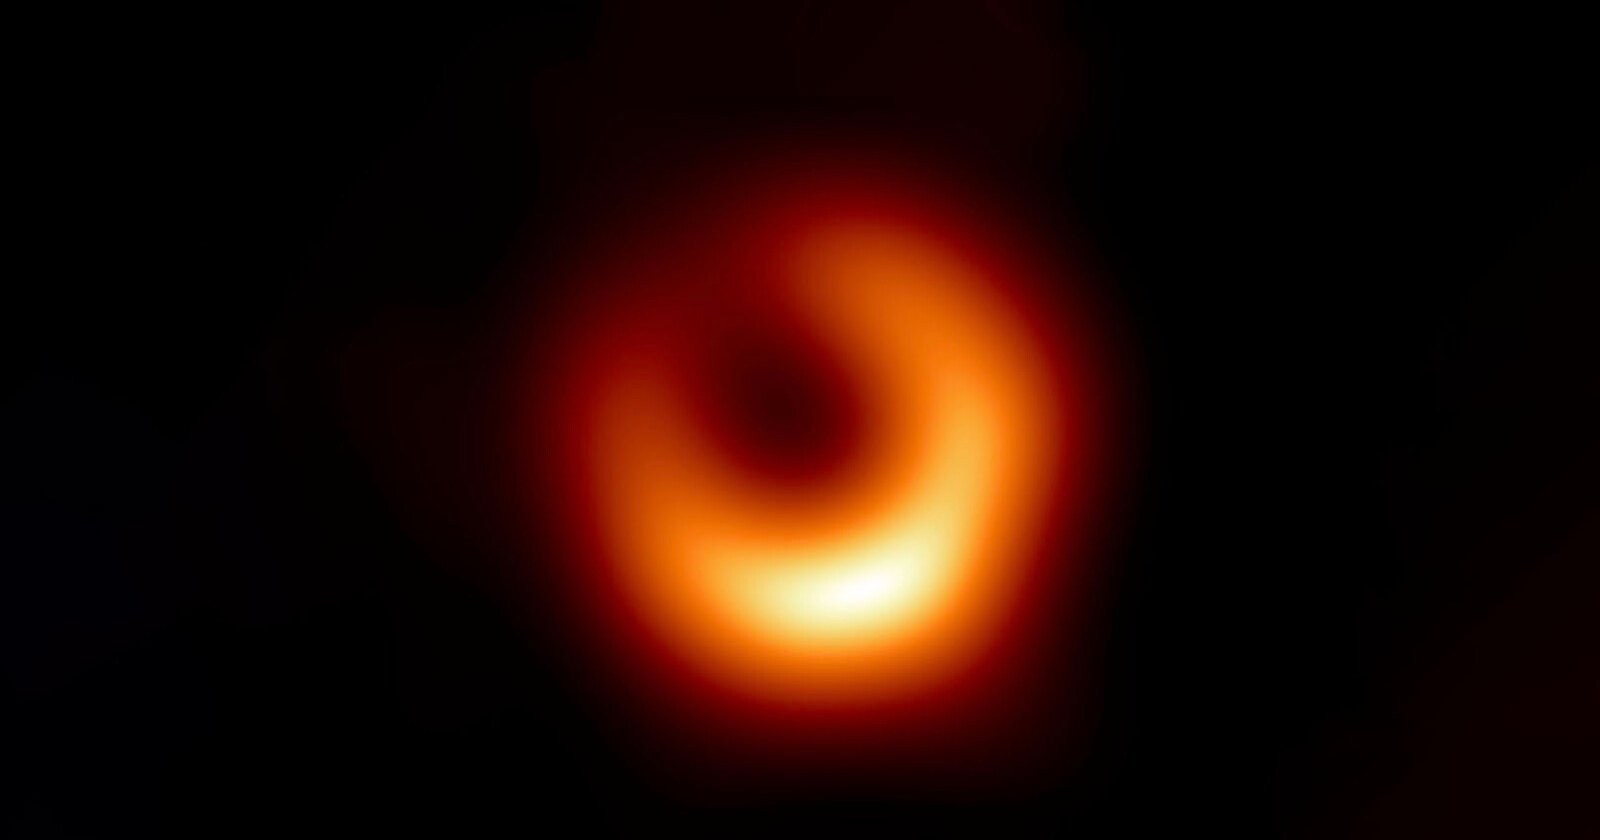 This is the Sharpest Black Hole Image Yet